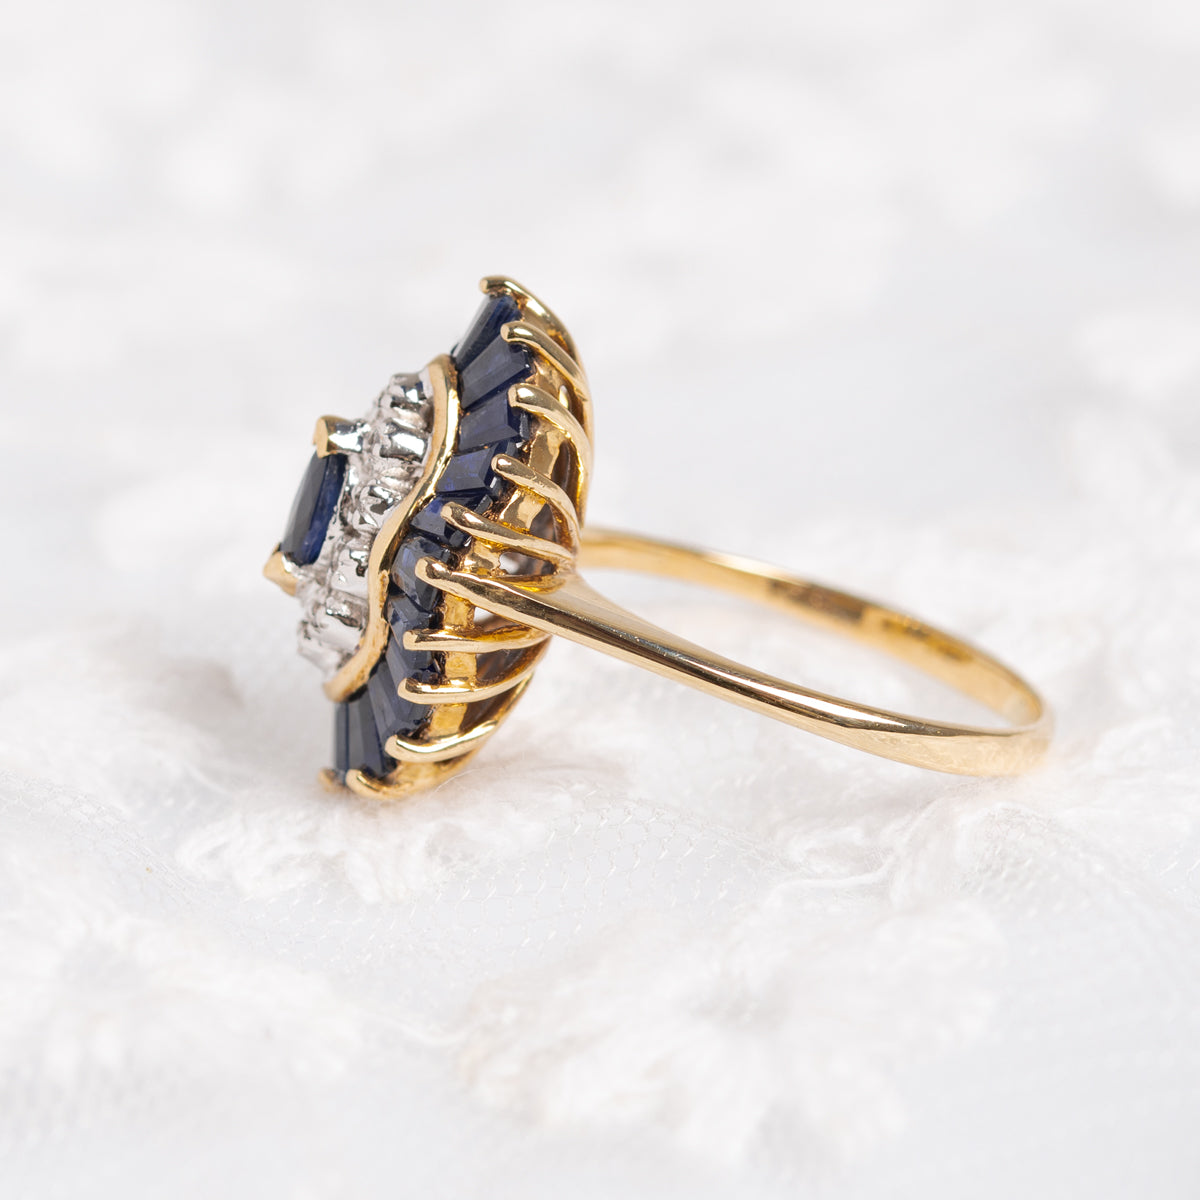 9ct Gold Natural Sapphire & Diamond Gemstone Cocktail Ring Halo Design UK Size M (A1403)